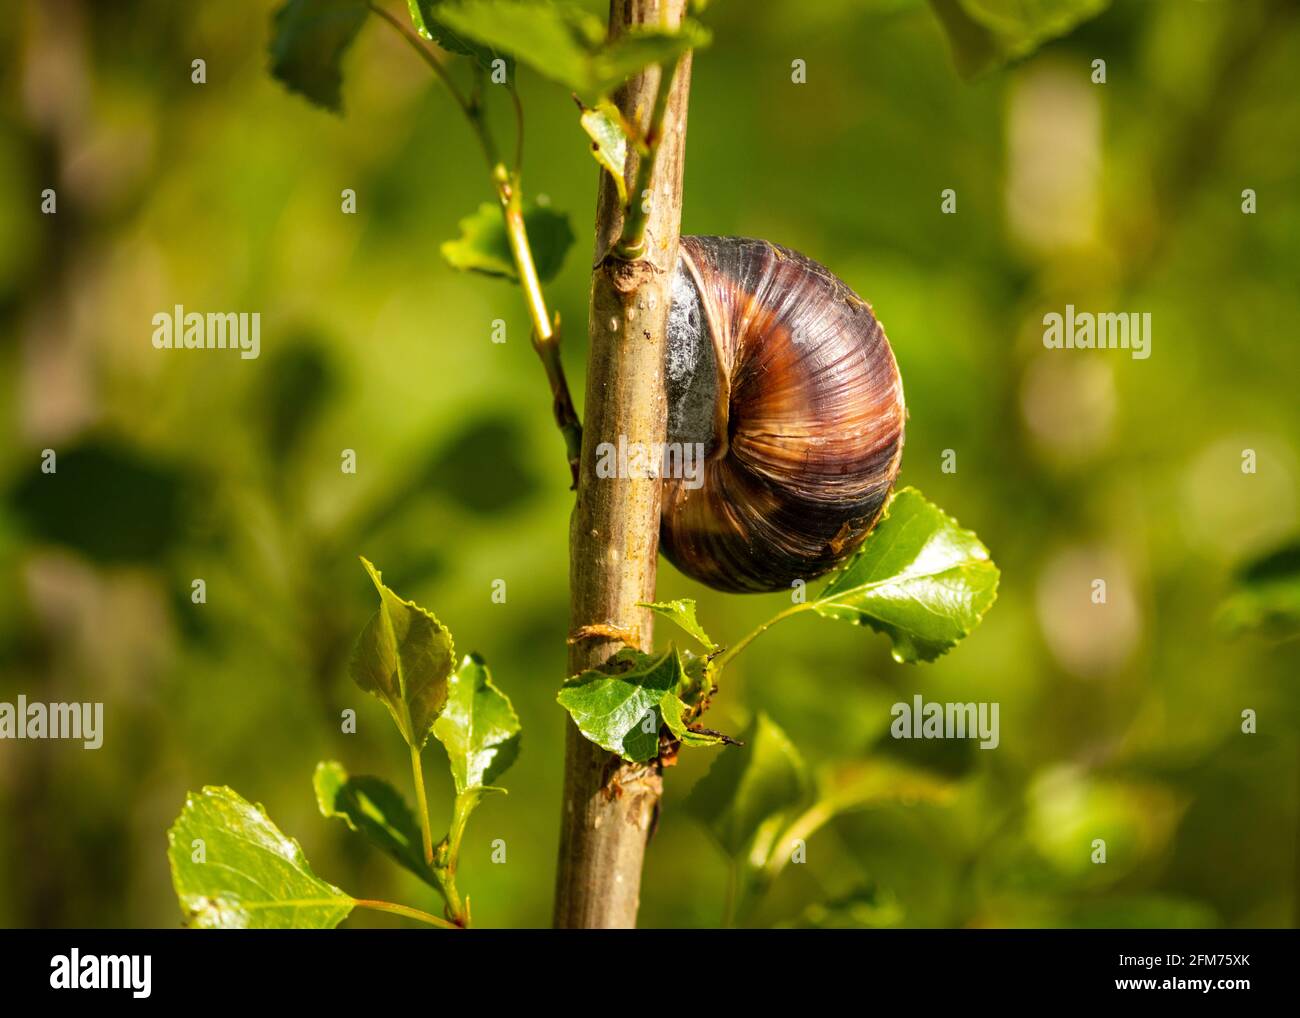 Close up view of sealed sleeping Brown Garden Snail or Cornu Aspersum aestivating on young Black Poplar tree or Populus nigra on dry hot summer day Stock Photo